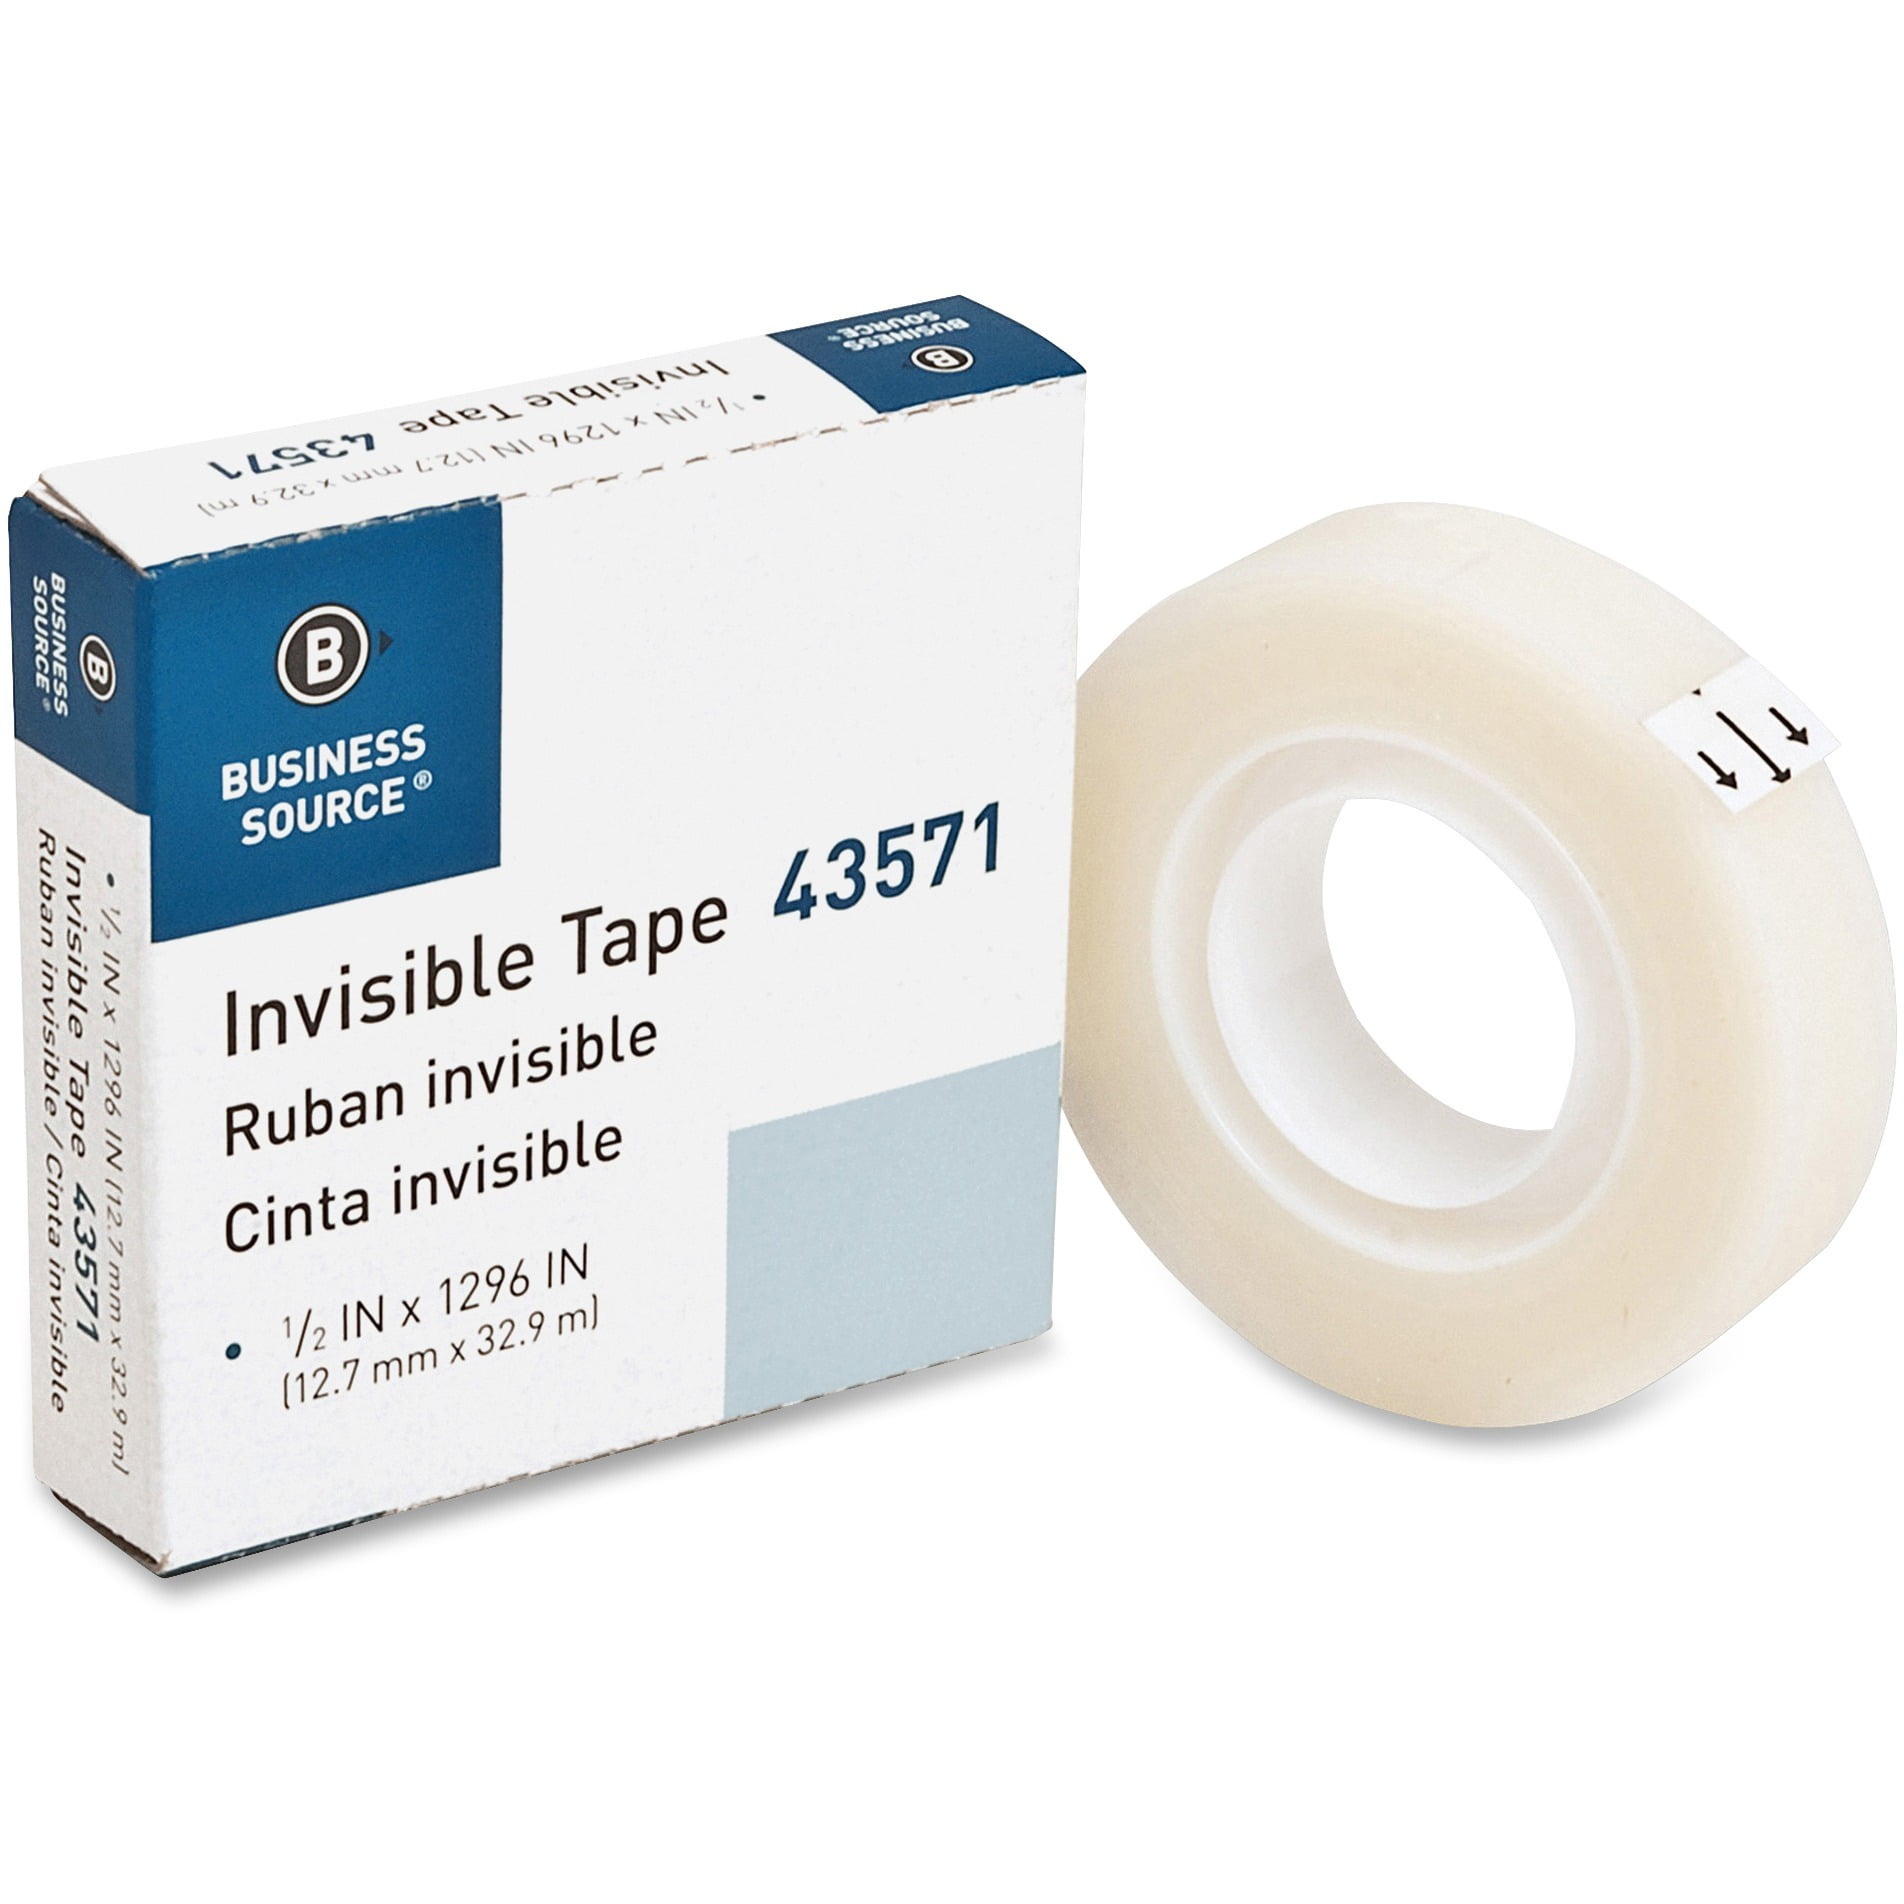 Invisible Tape Ins